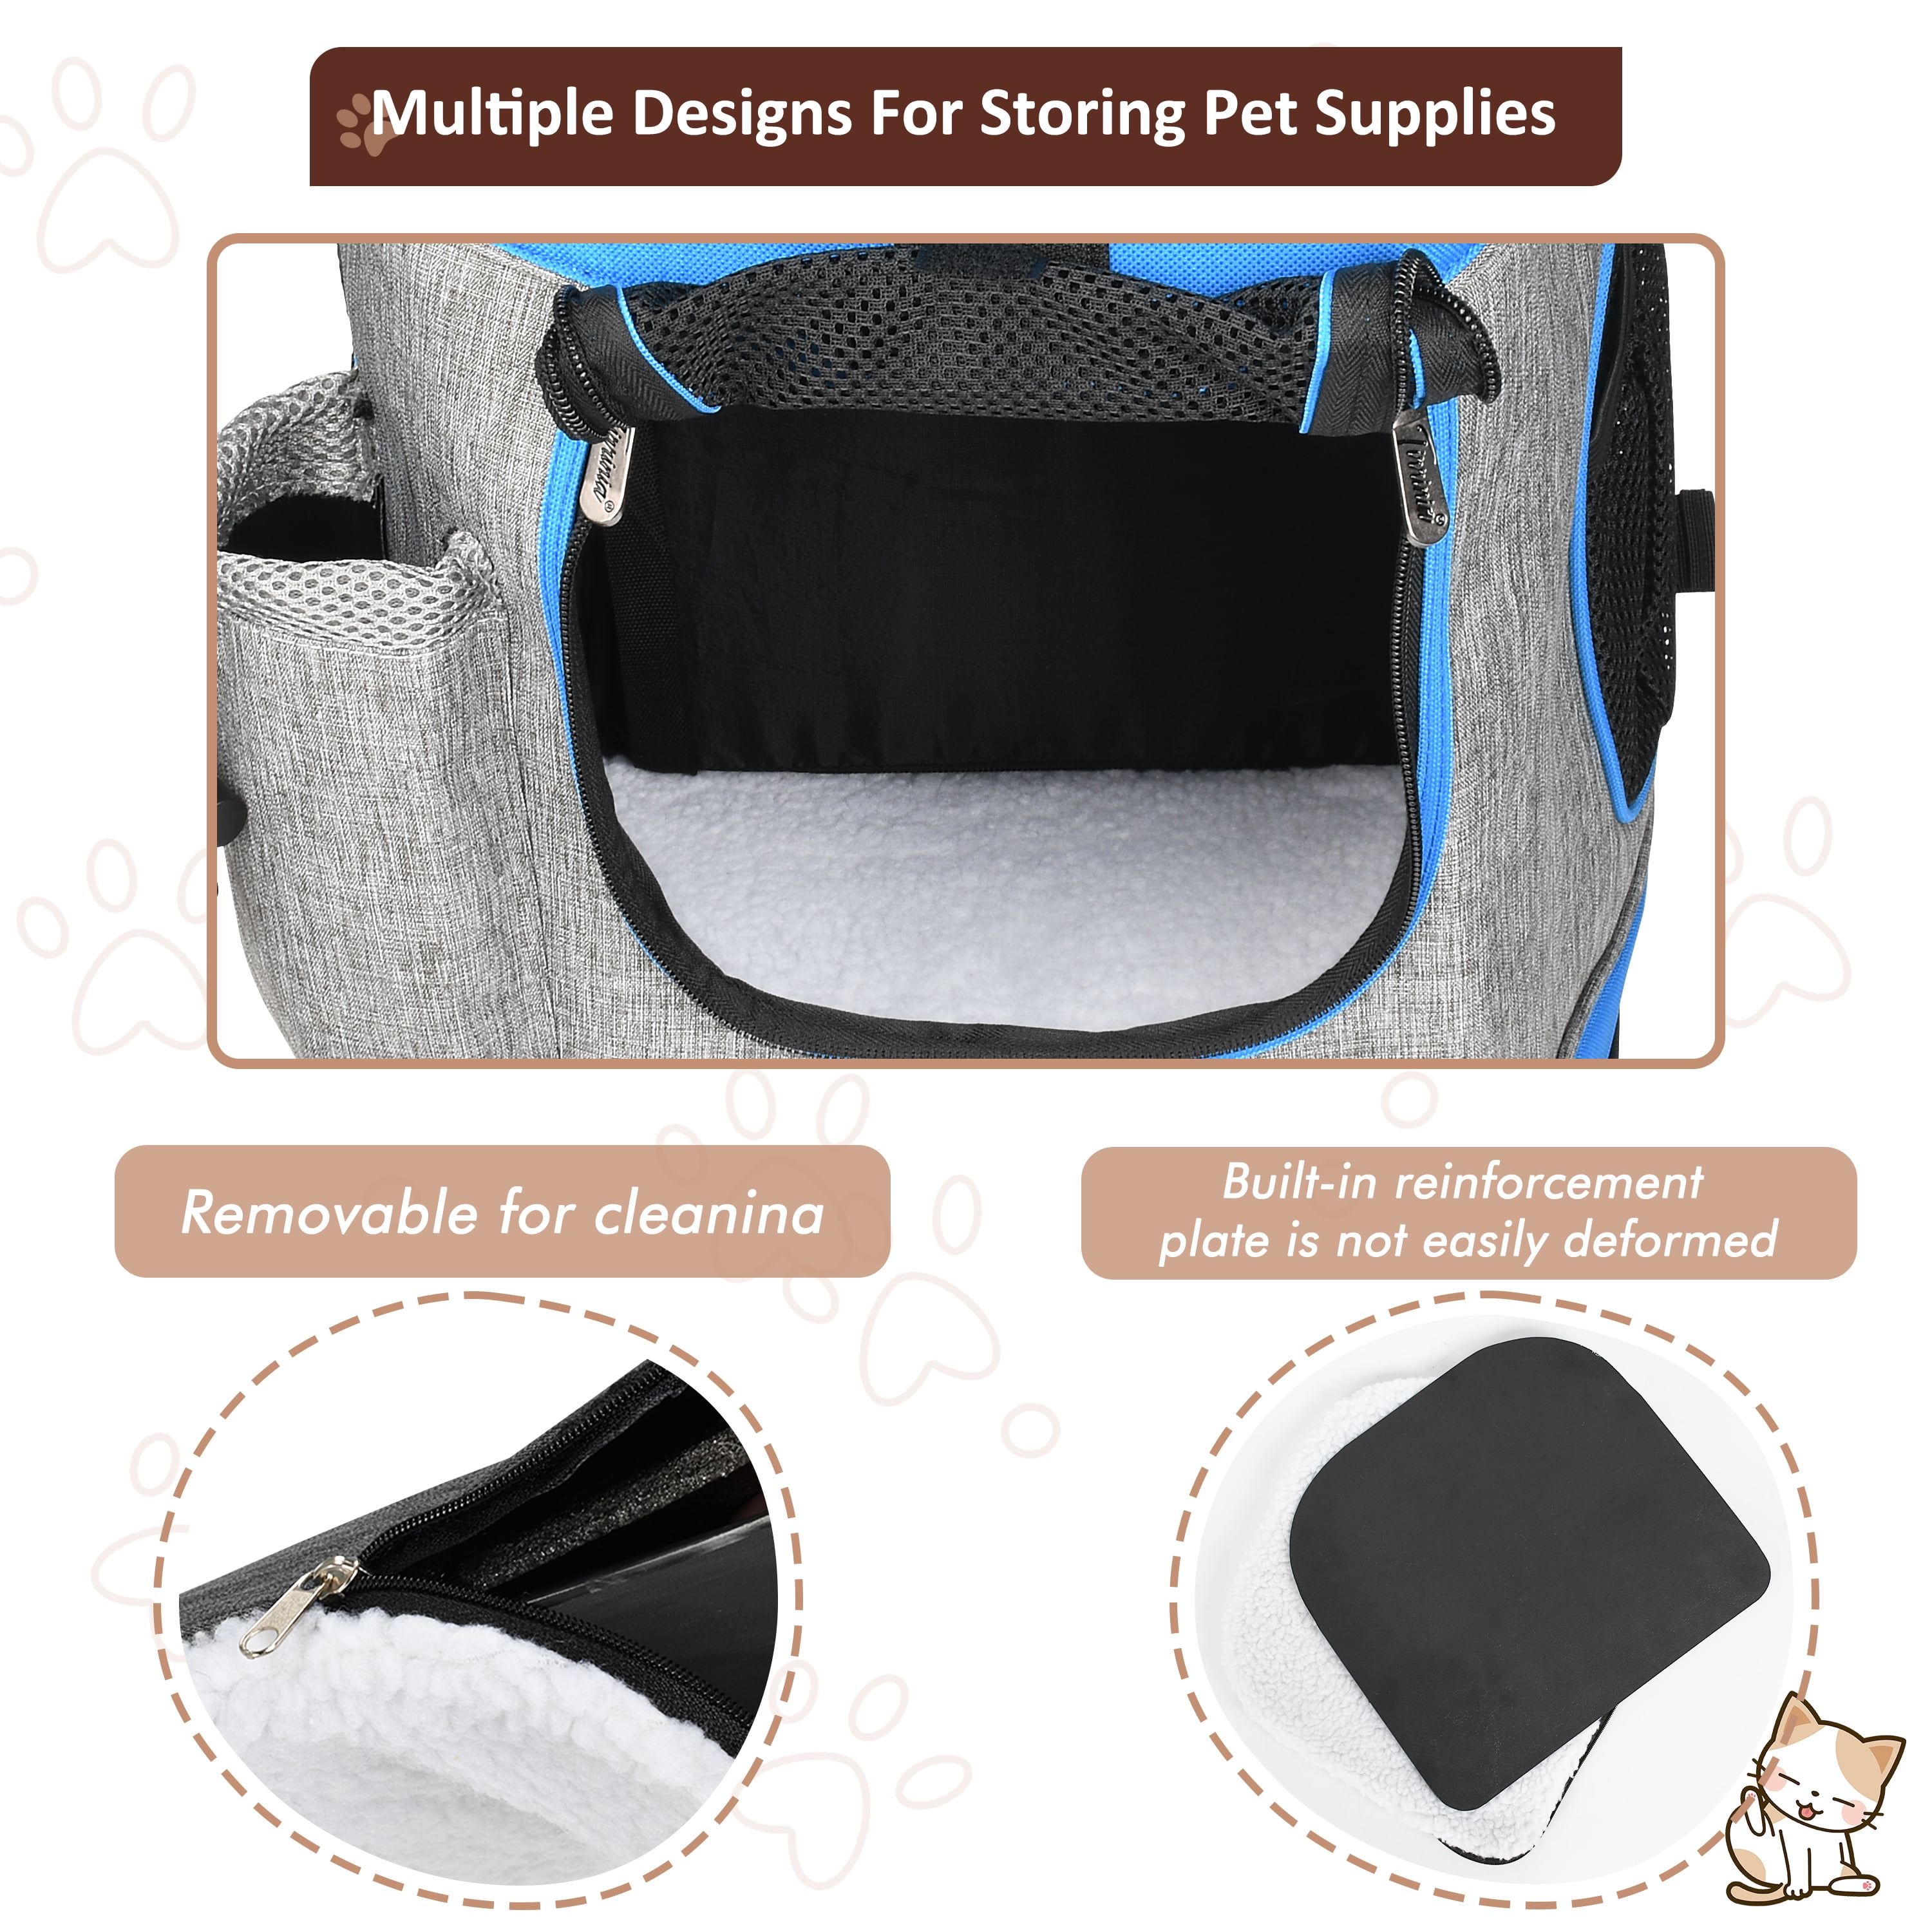 Dropship FluffyDream Pet Carrier Backpack For Large/Small Cats And Dogs,  Puppies, Safety Features And Cushion Back Support For Travel, Hiking,  Outdoor Use, Black to Sell Online at a Lower Price